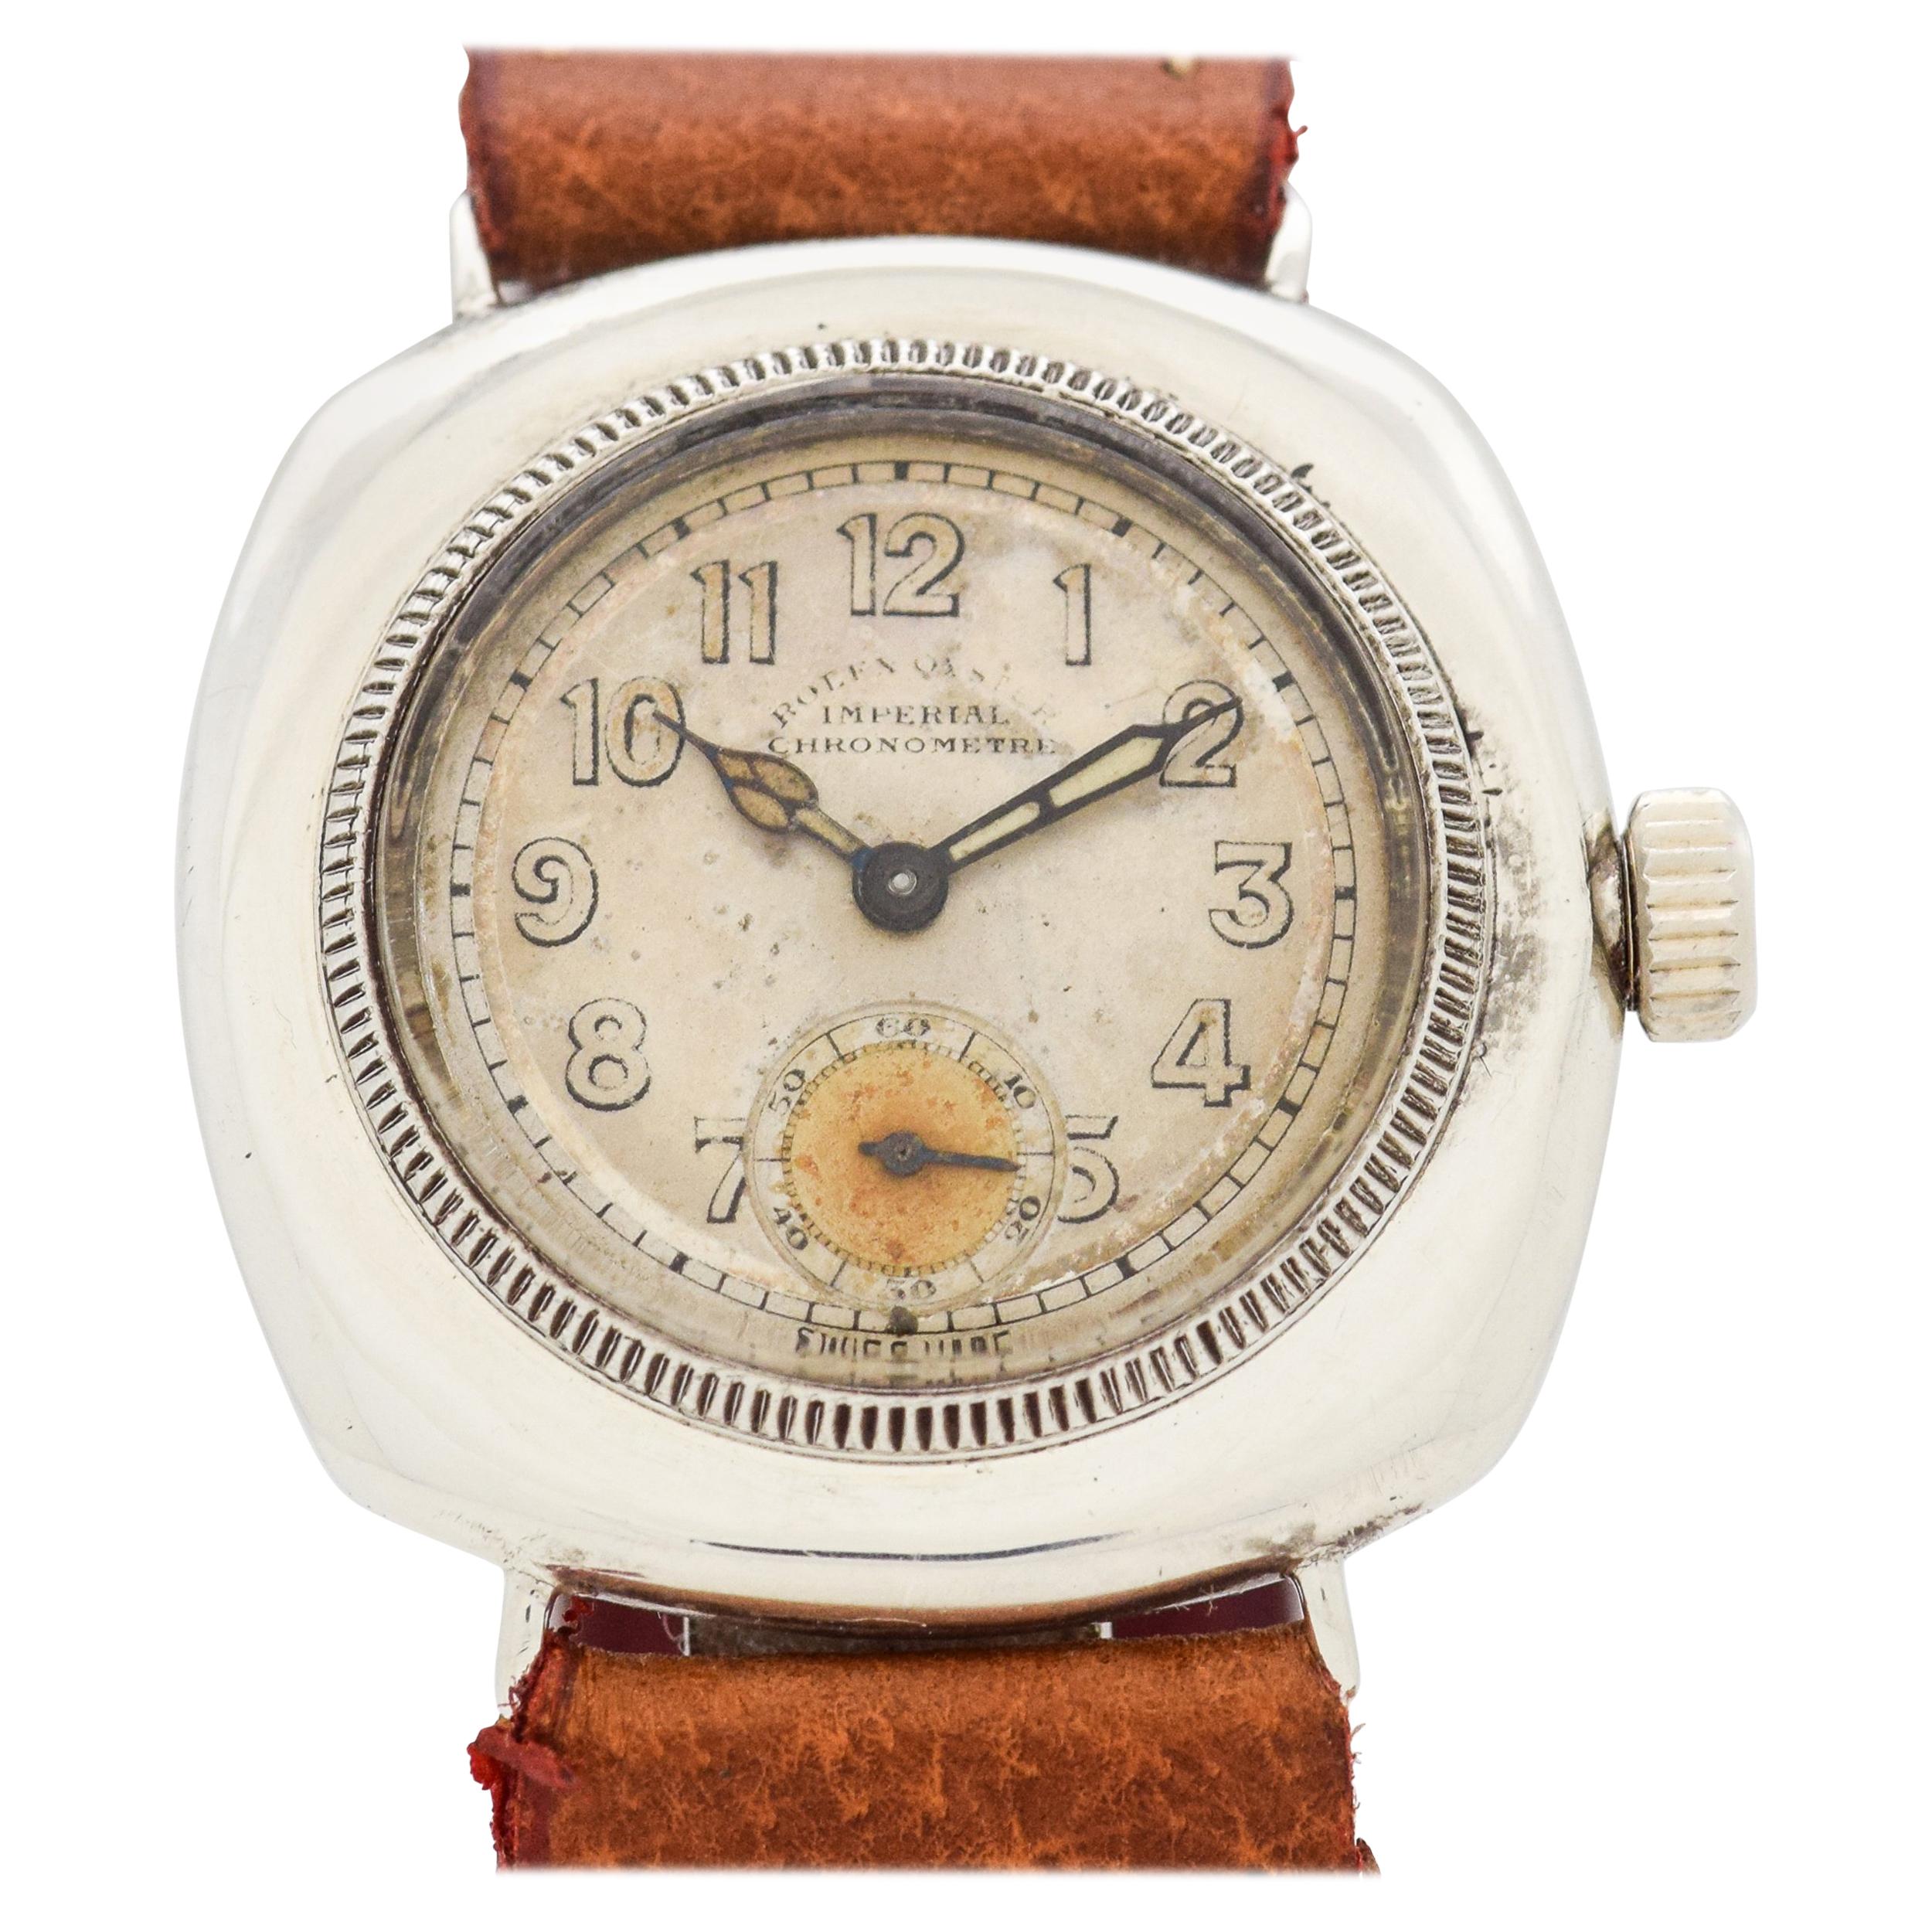 Vintage Rolex Oyster Cushion-Shaped Watch, 1925